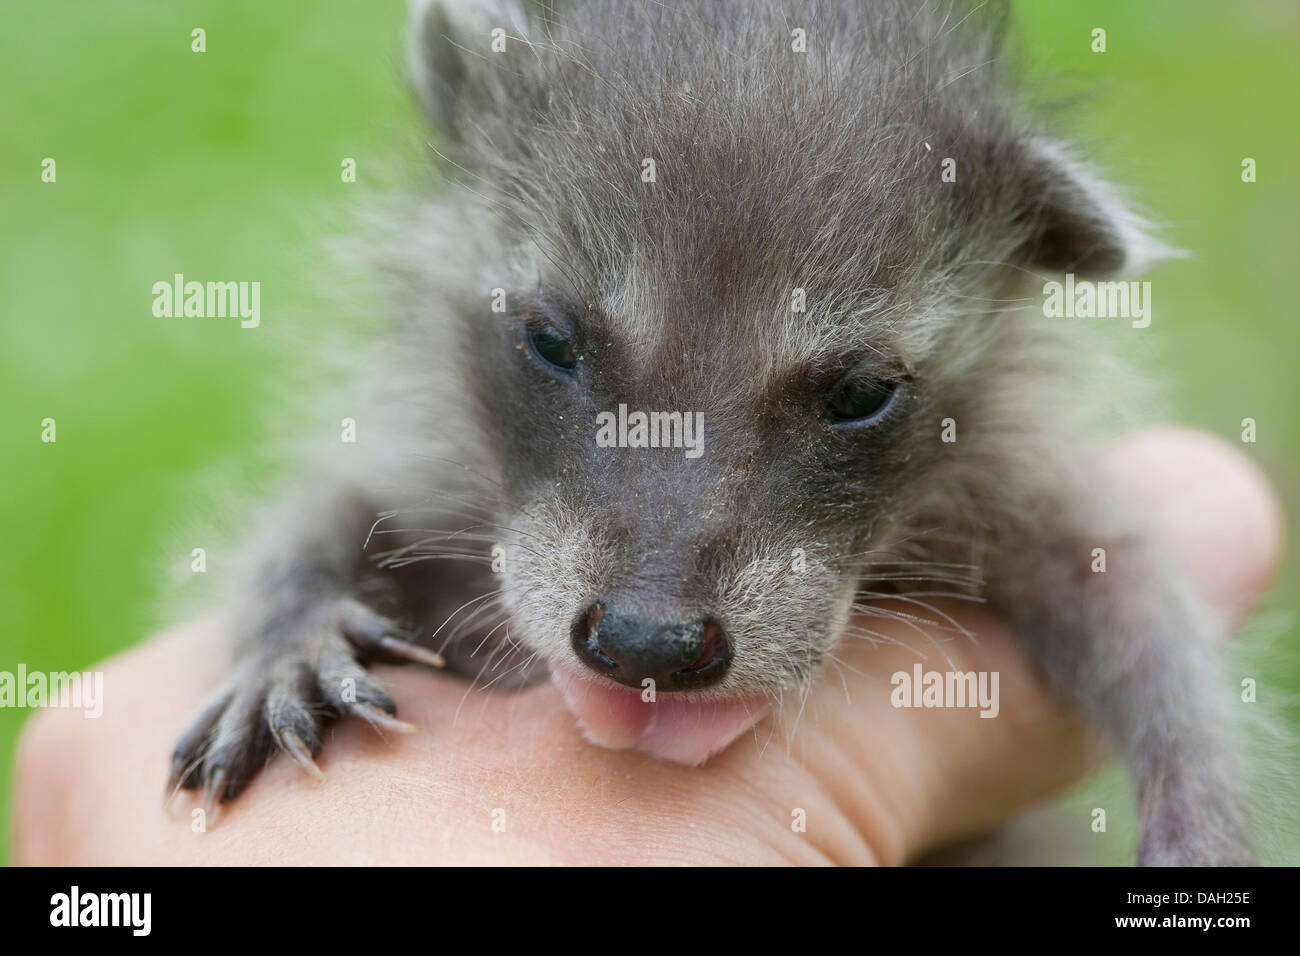 common raccoon (Procyon lotor), orphaned young animal in the hand of a human being, Germany Stock Photo